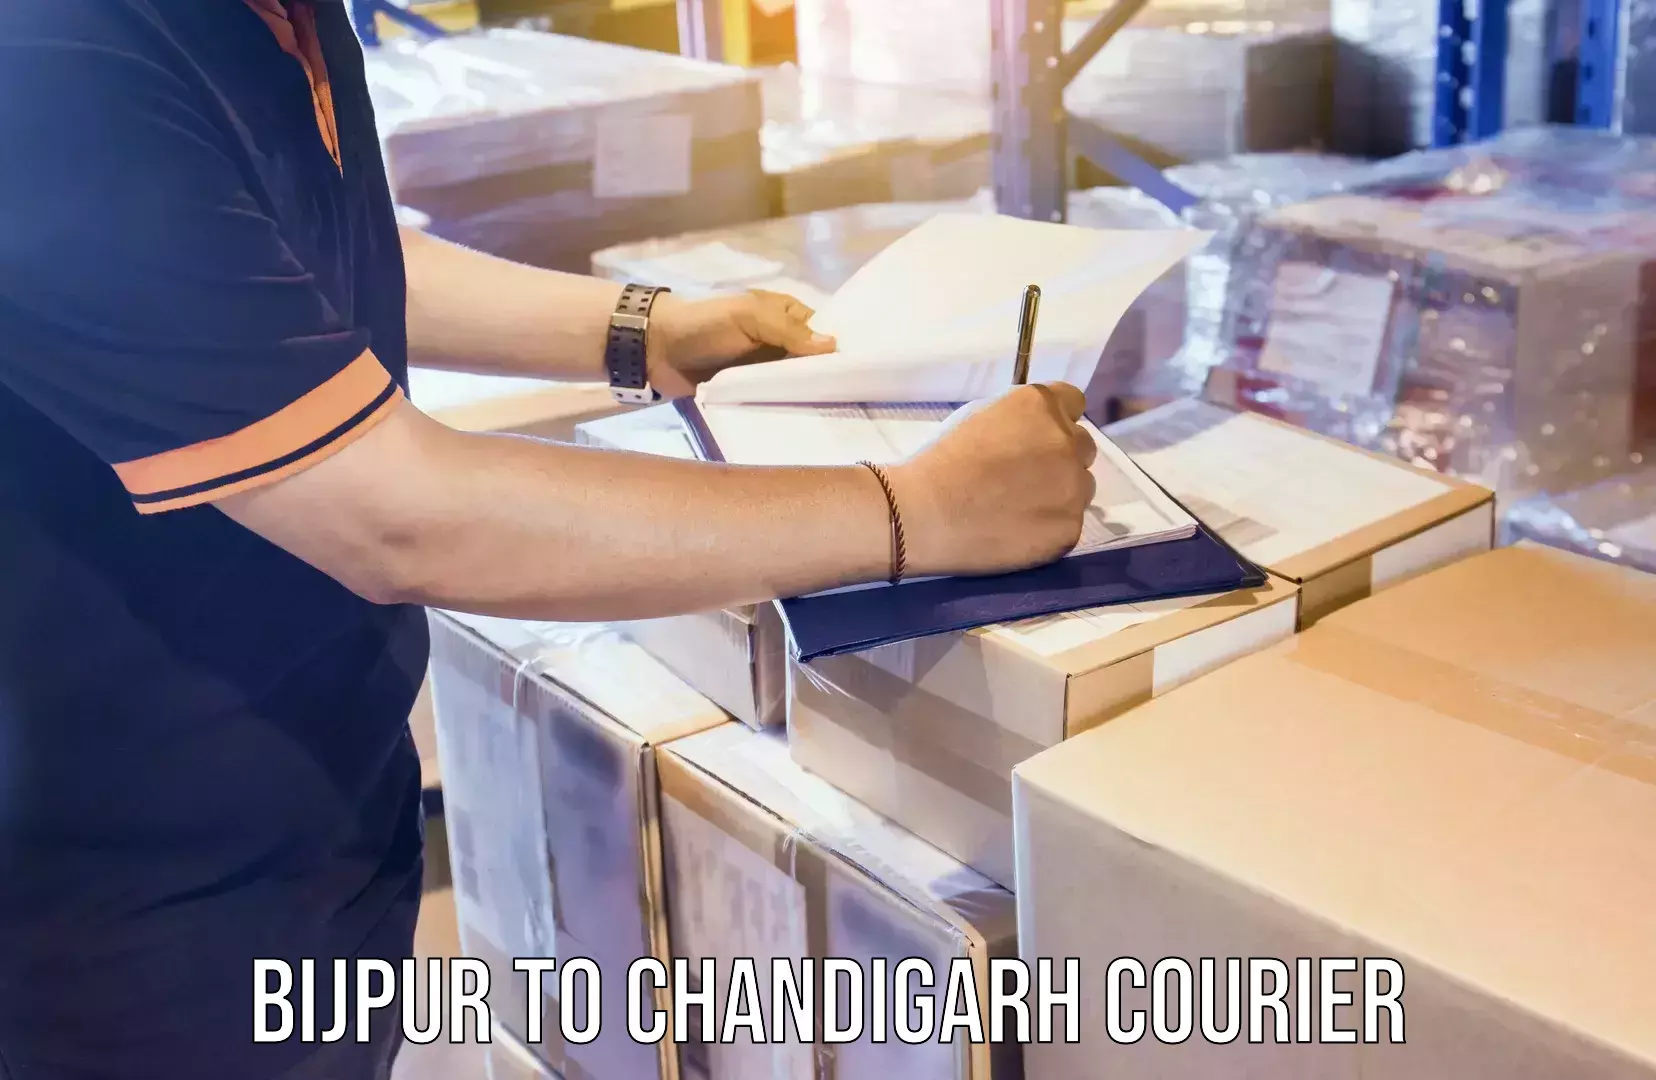 Express delivery capabilities Bijpur to Chandigarh